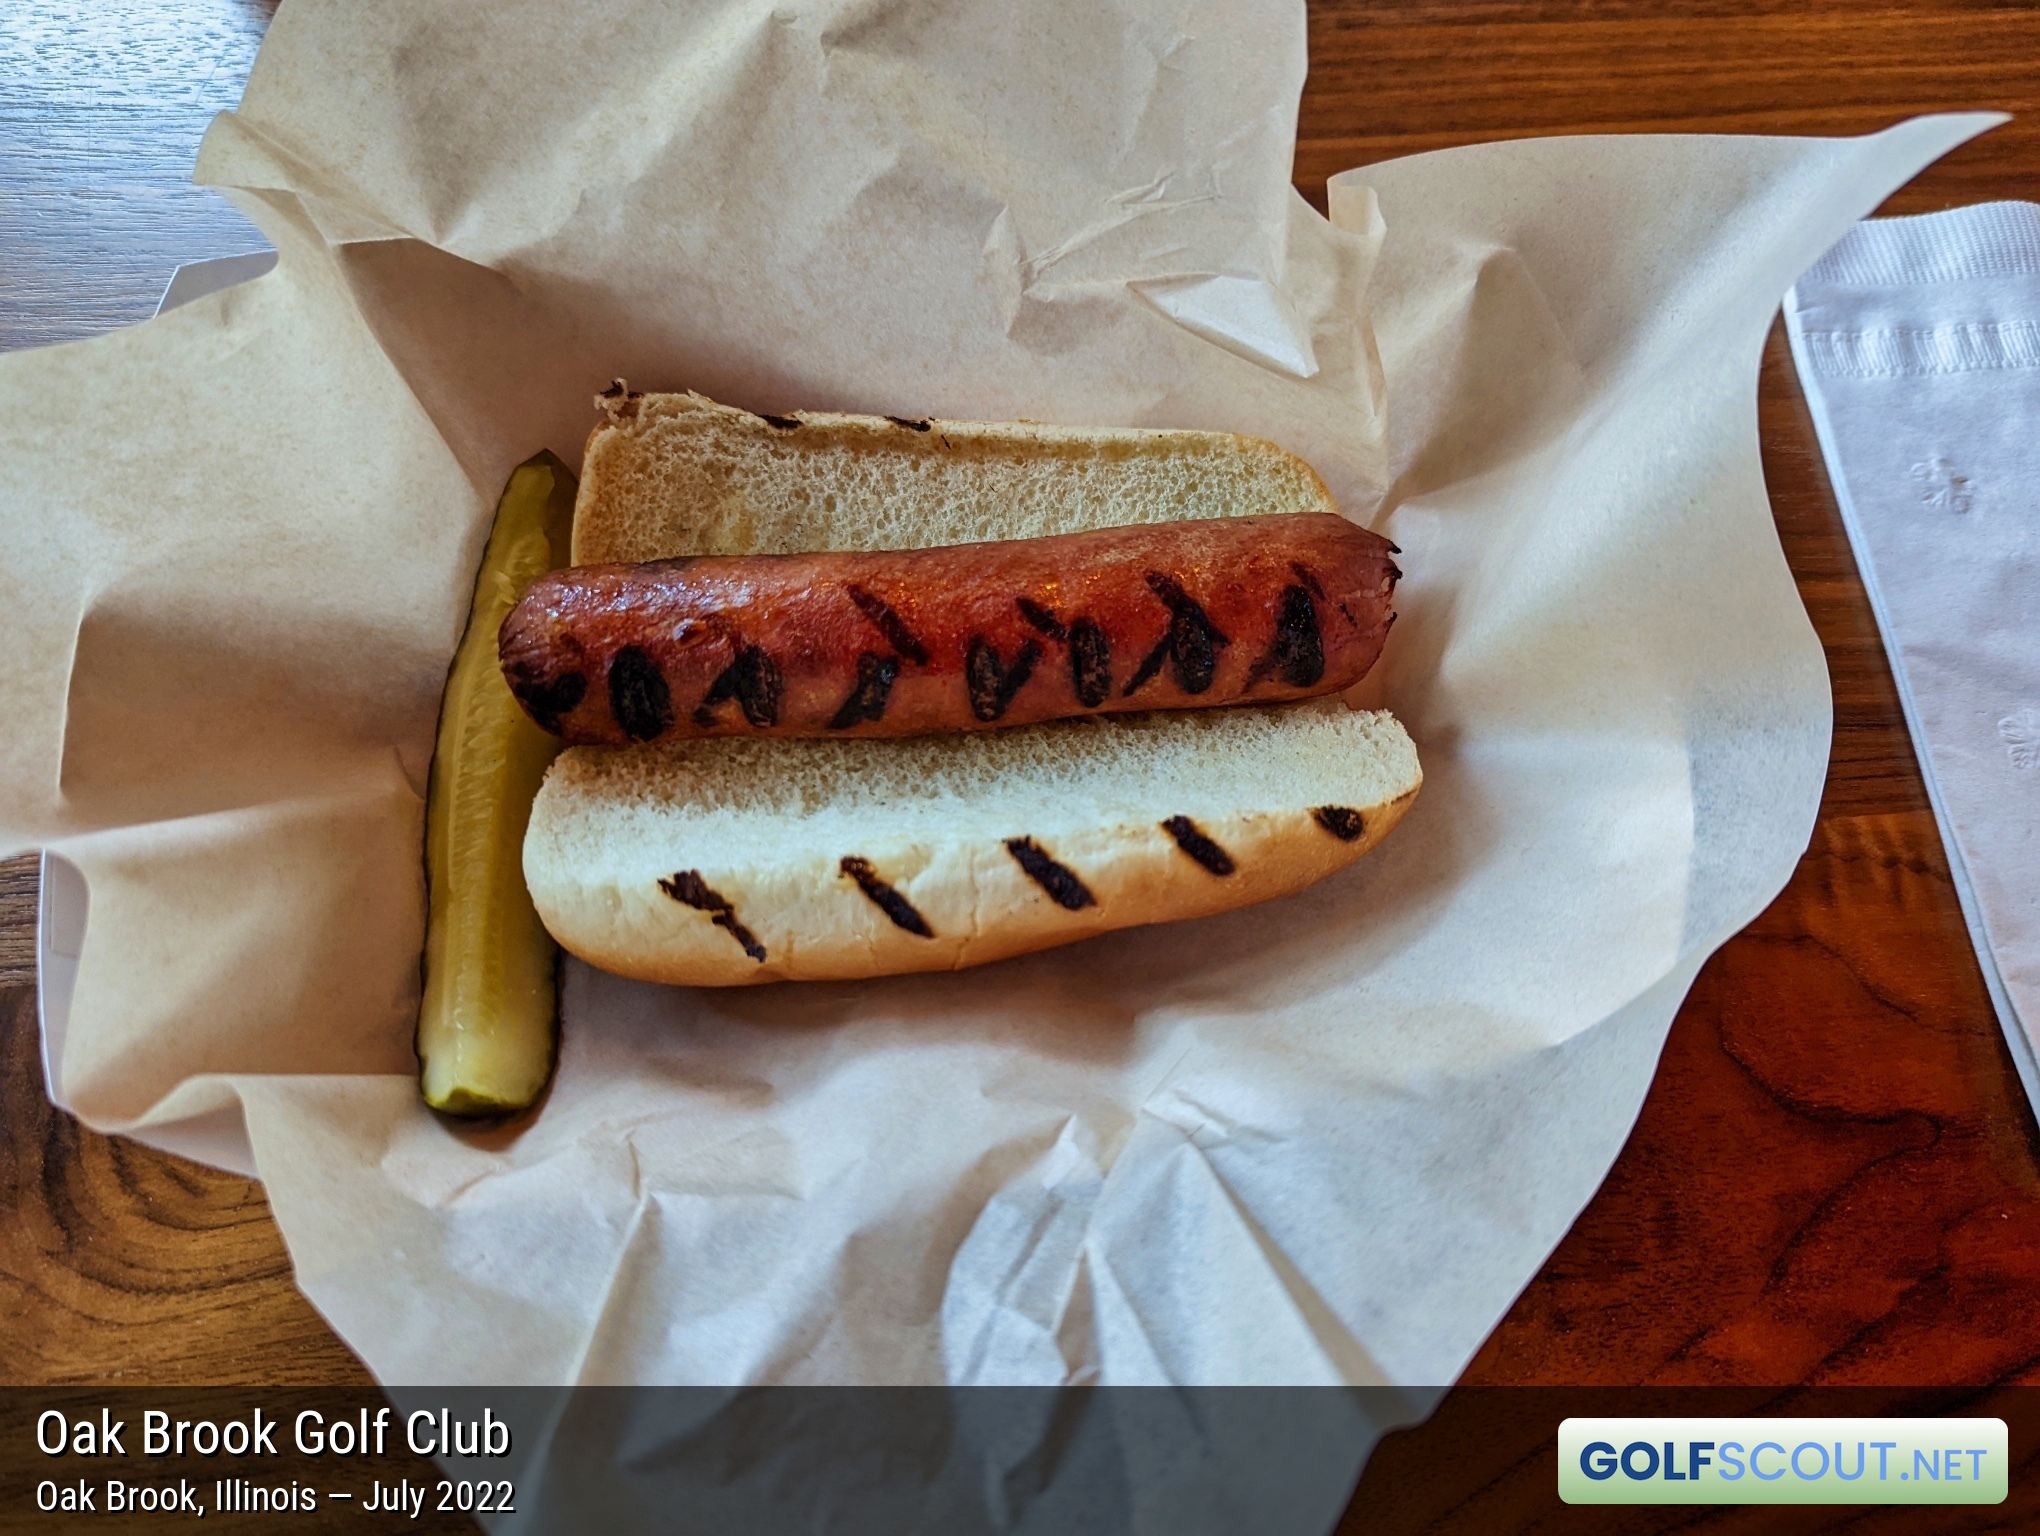 Photo of the food and dining at Oak Brook Golf Club in Oak Brook, Illinois. Photo of the hot dog at Oak Brook Golf Club in Oak Brook, Illinois.